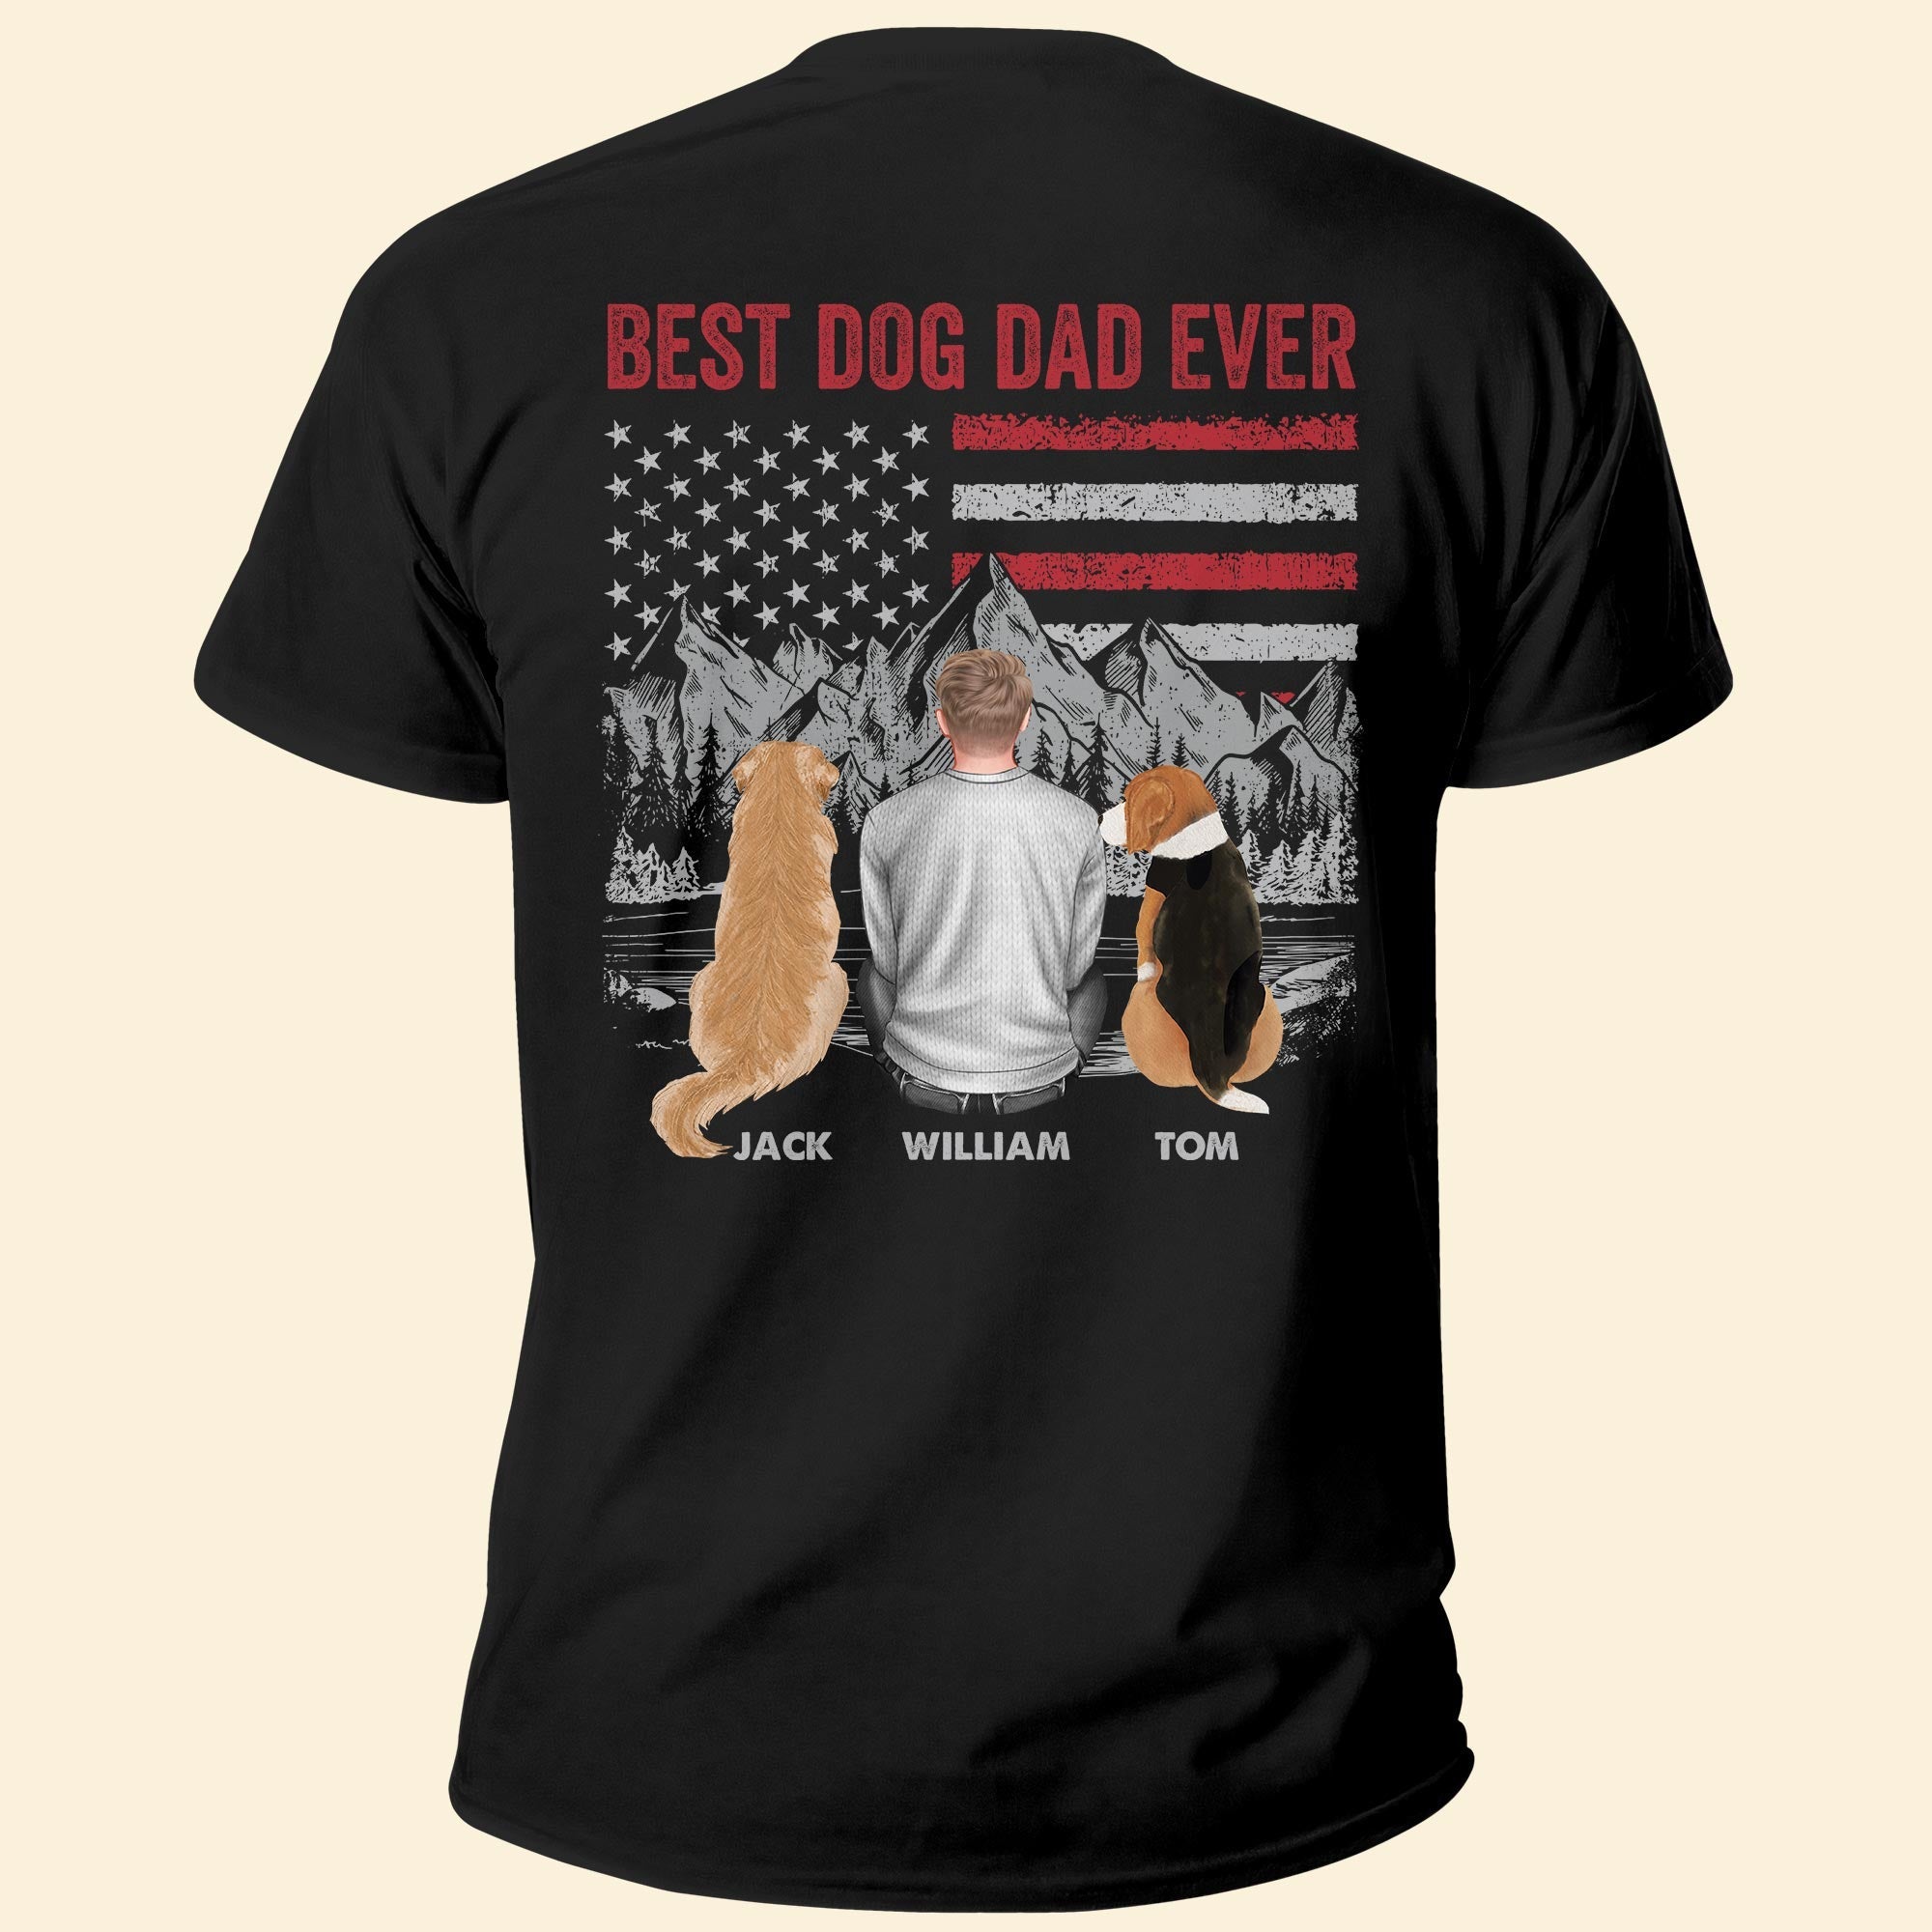 Best Dog Dad Ever American Flag T-Shirt, Gift for Best Father